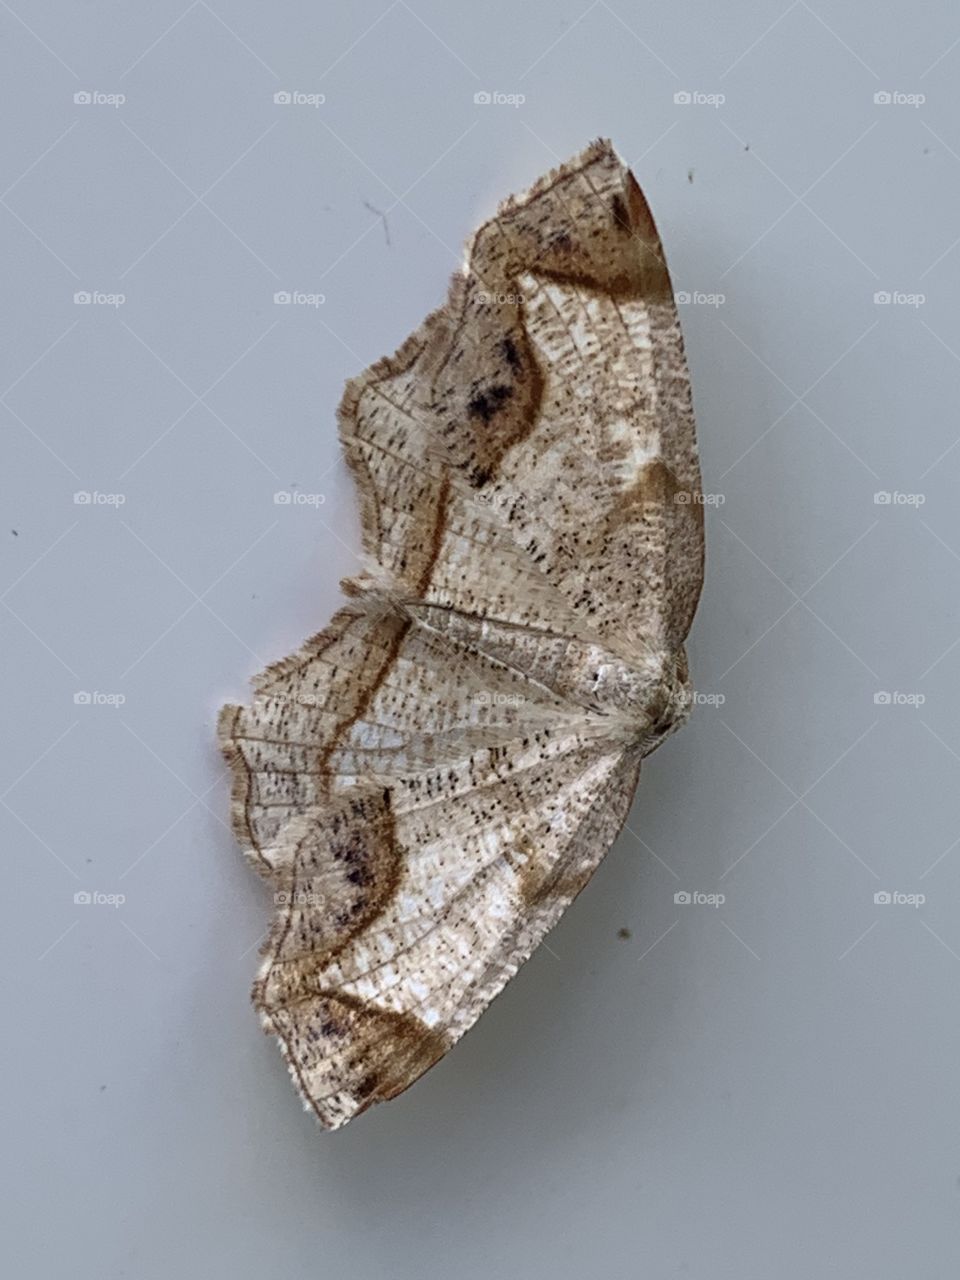 Map Moth - There's gotta be an red "X" somewhere?